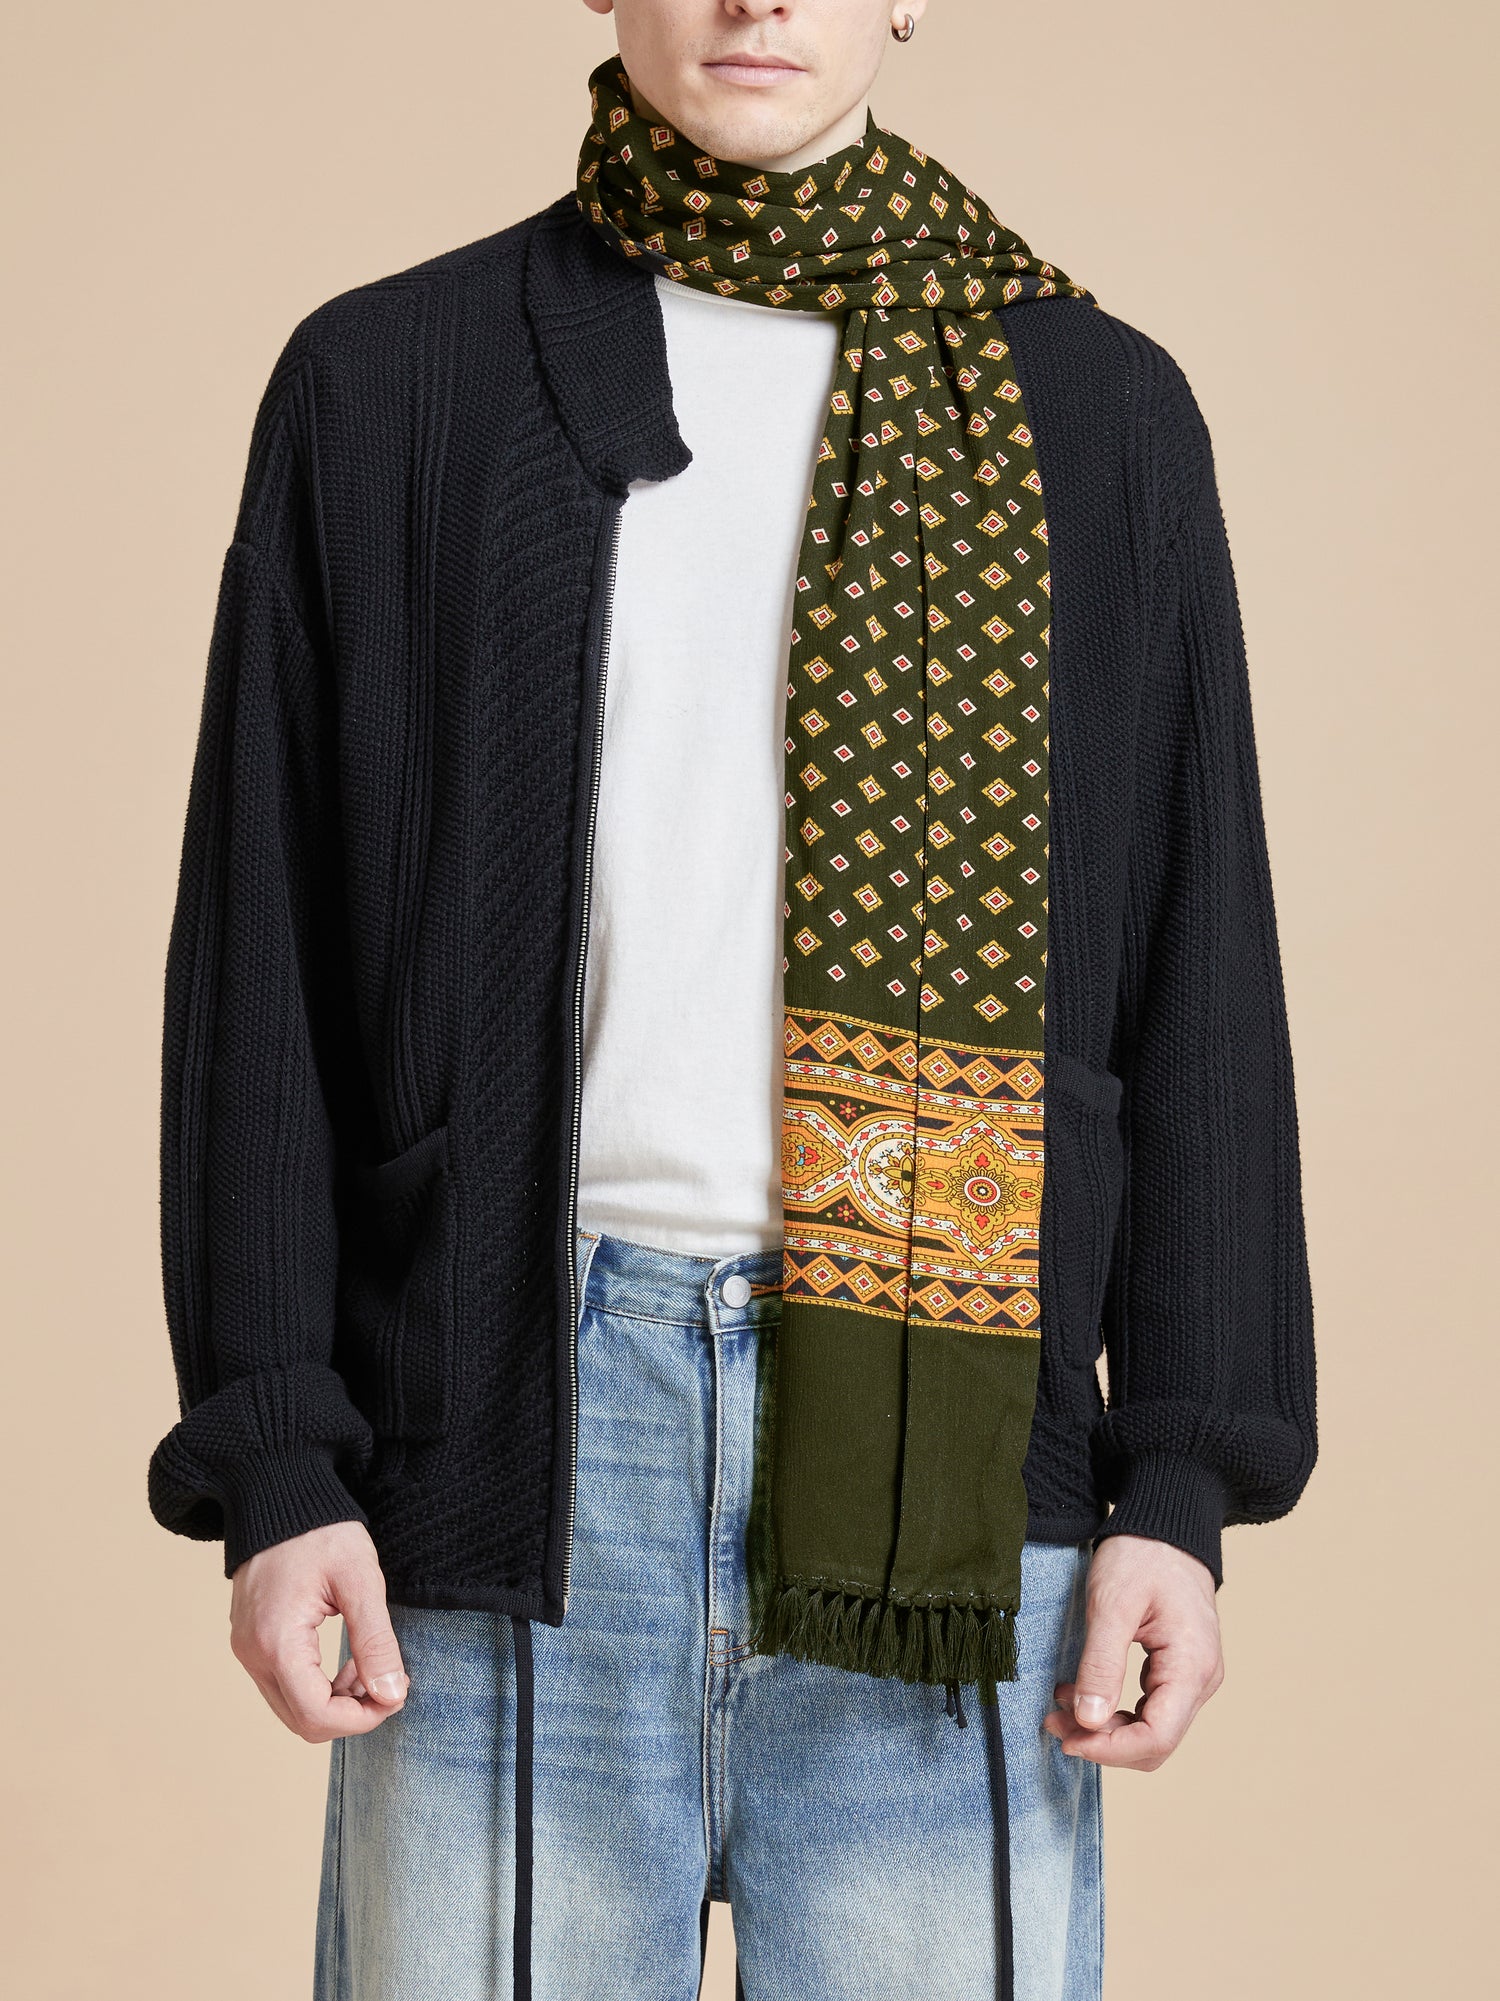 A man wearing a Greener Pastures Scarf by Found.